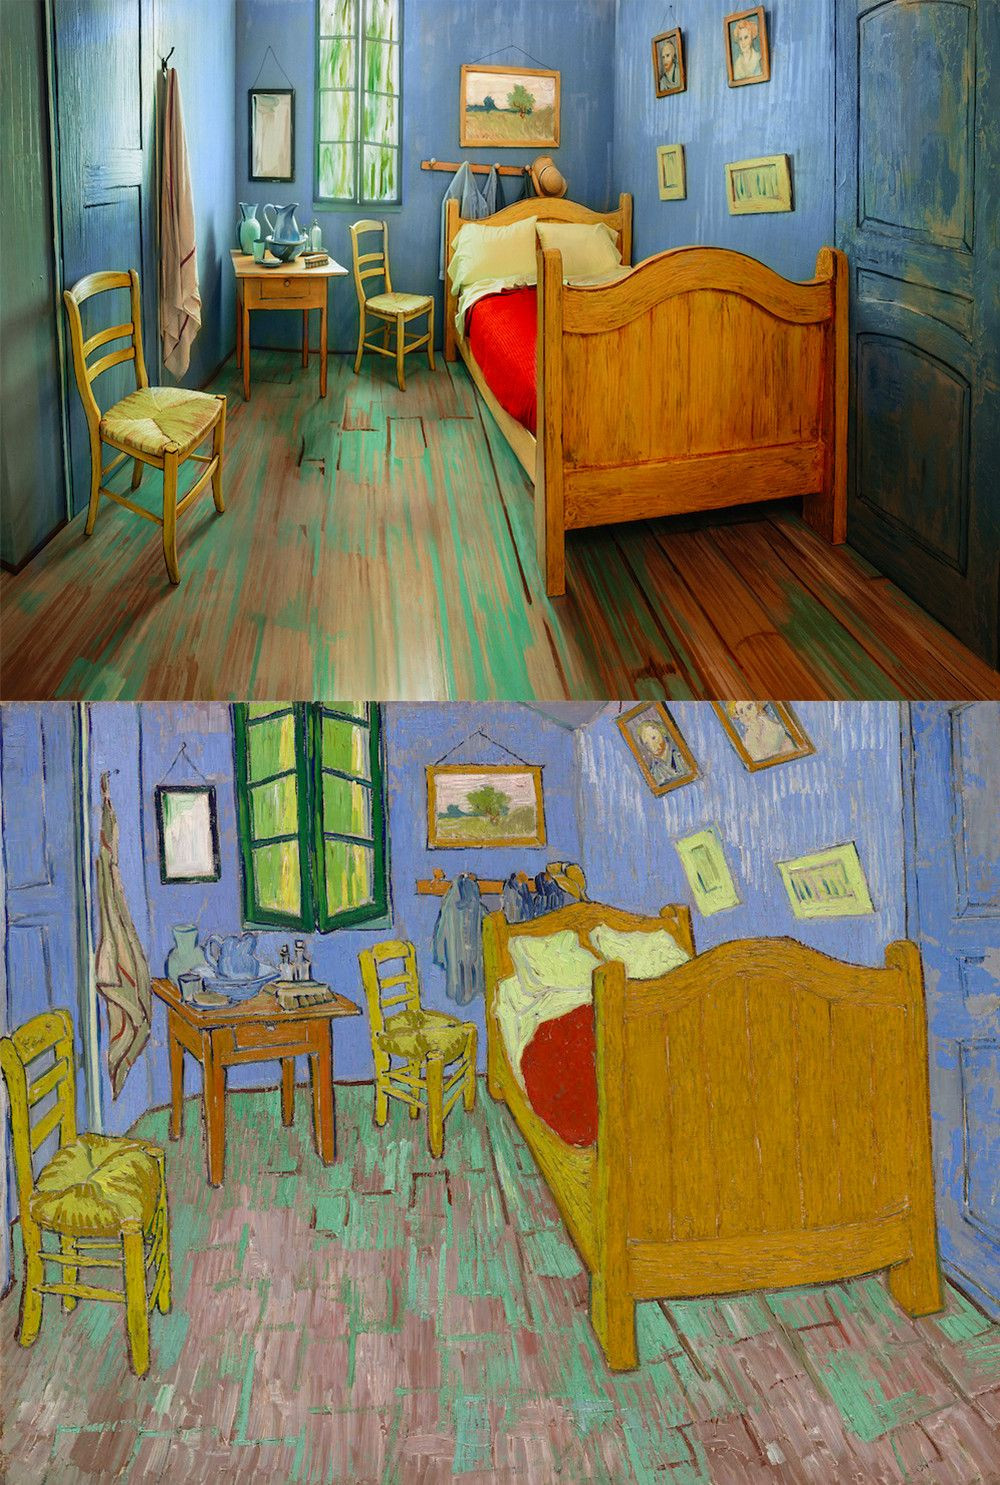 Van Gogh Bedroom Painting
 The Art Institute of Chicago’s clever new bedroom is up